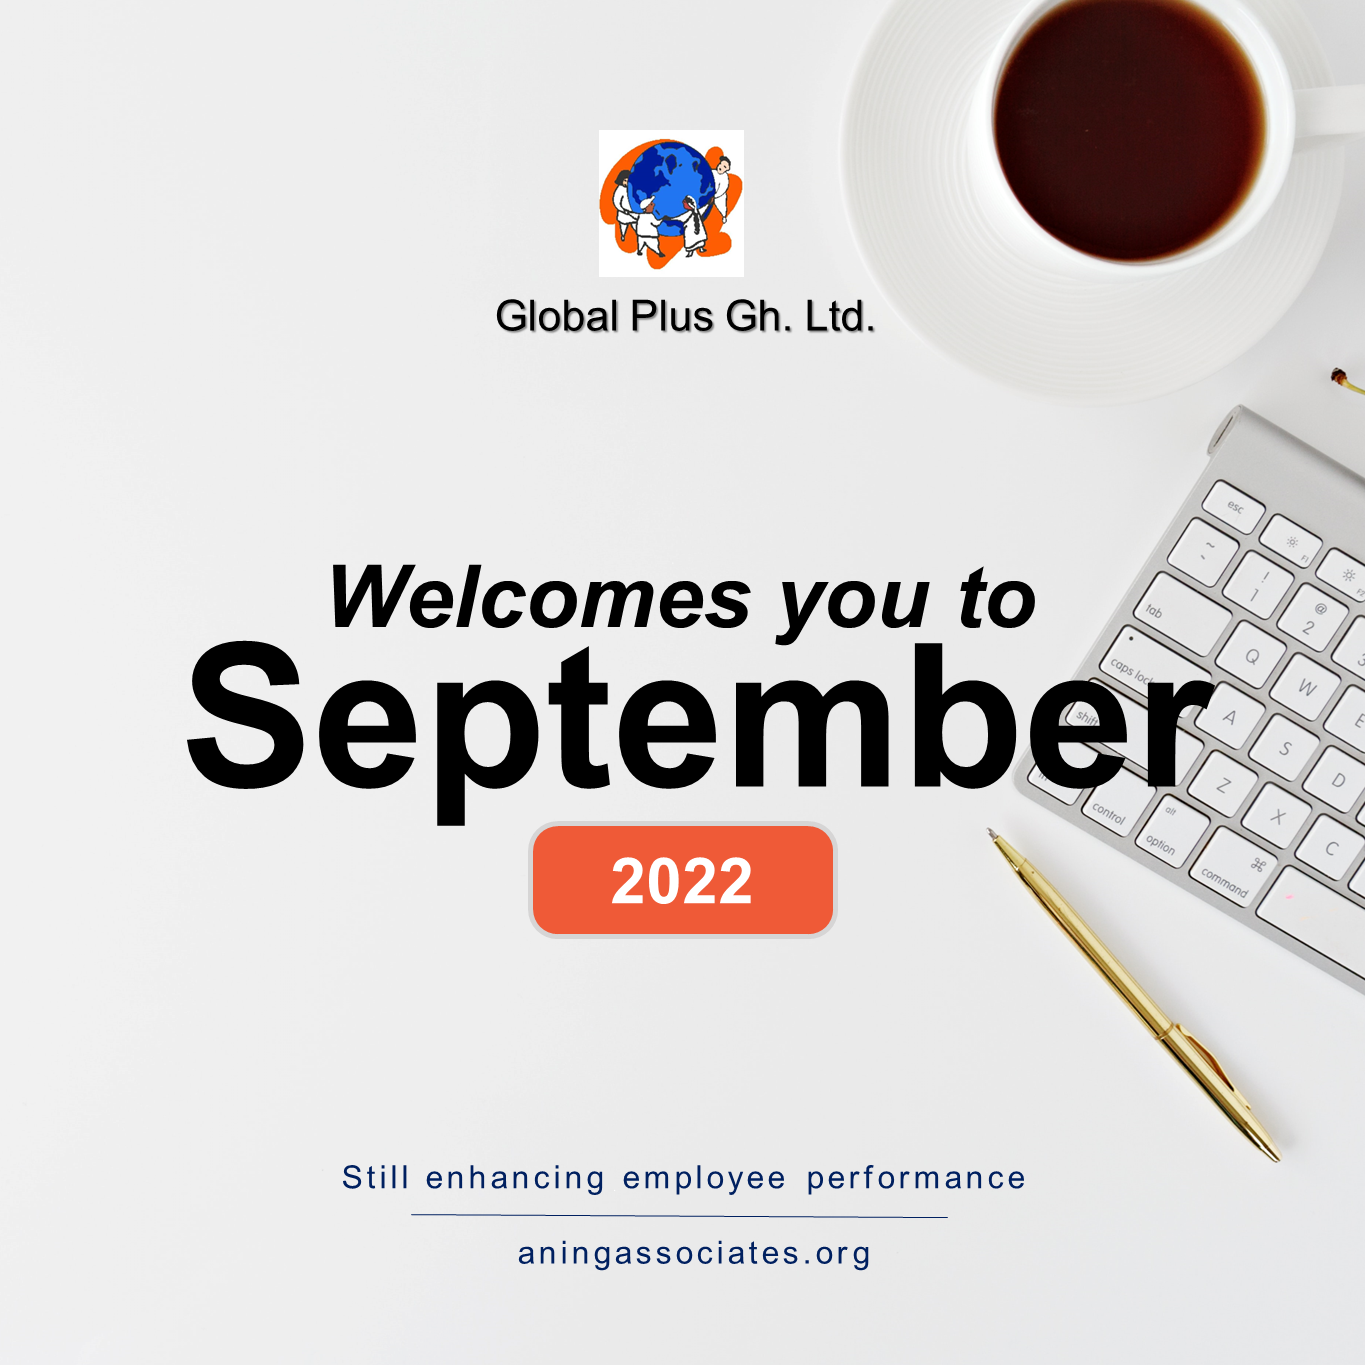 Welcome to September 2022